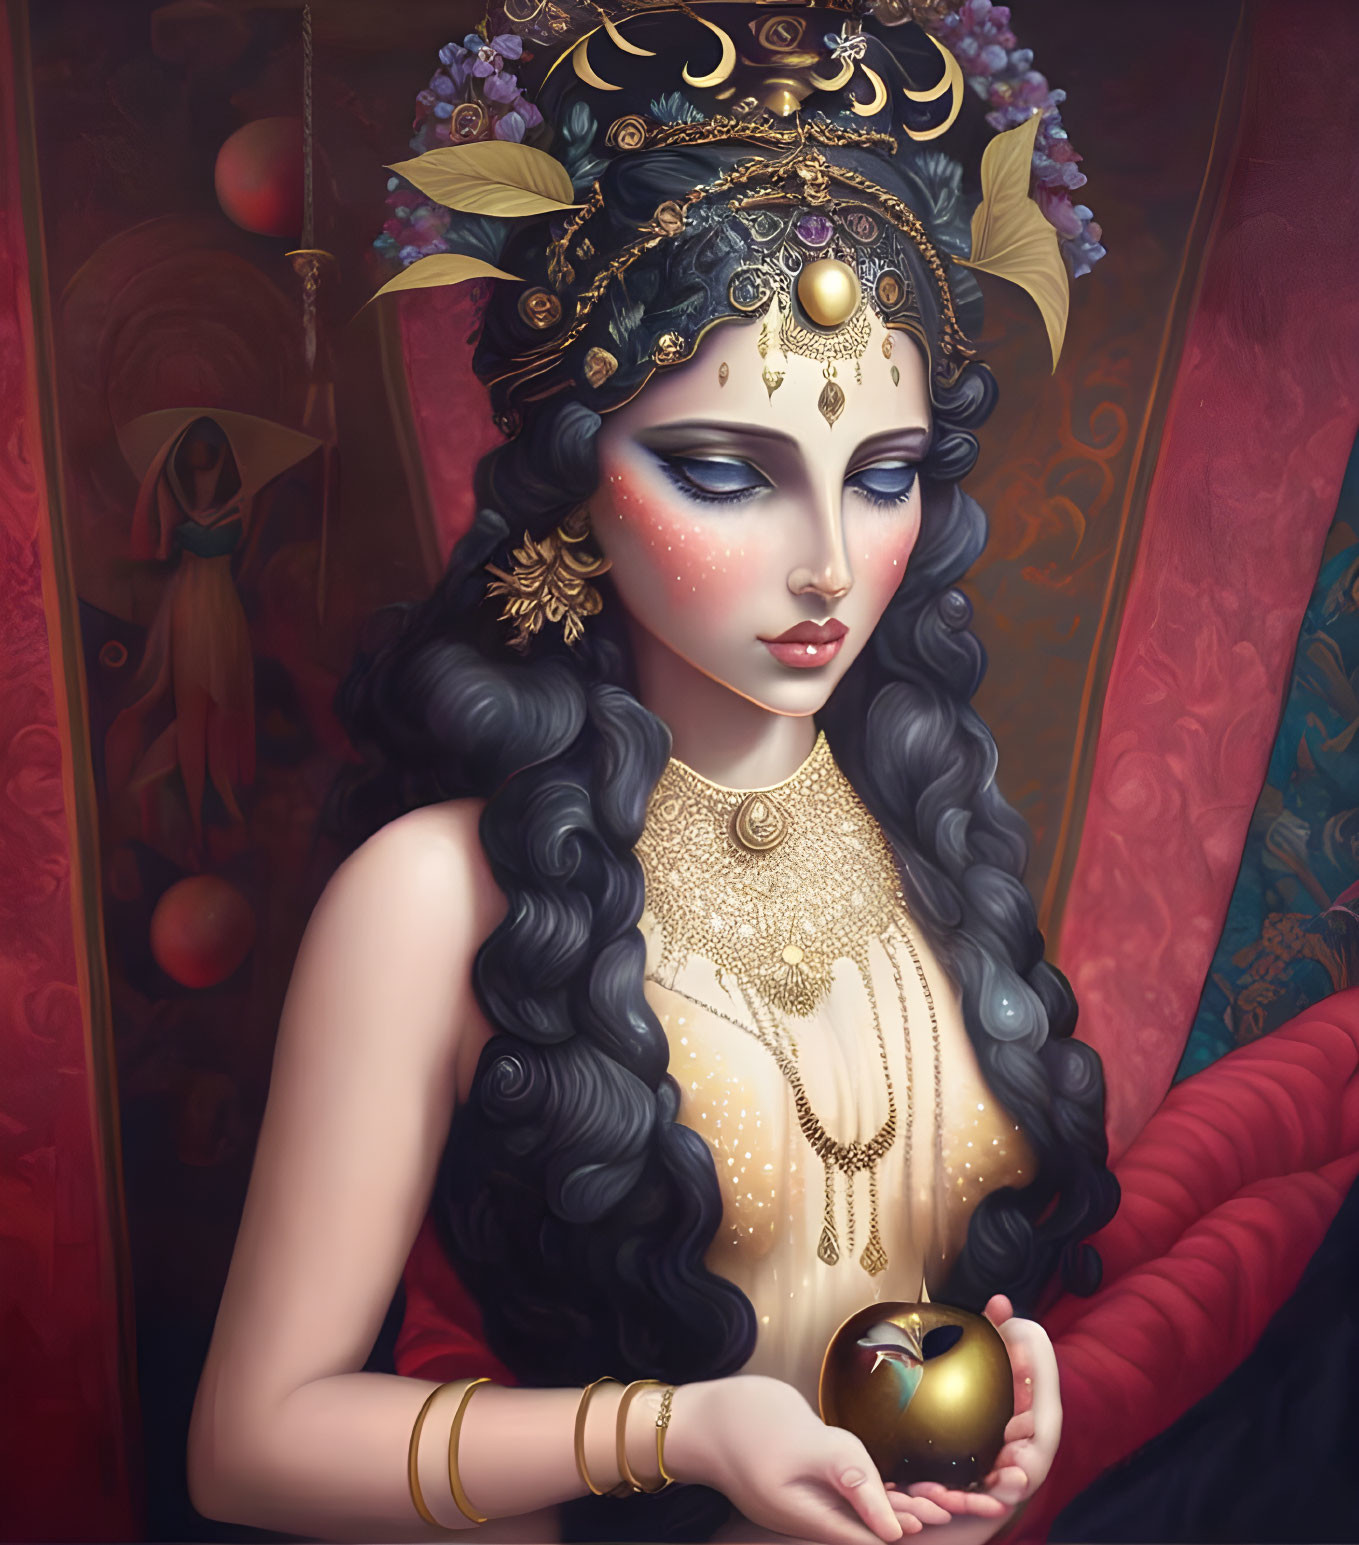 Detailed Illustration of Woman with Dark Wavy Hair and Golden Headdress Holding Apple